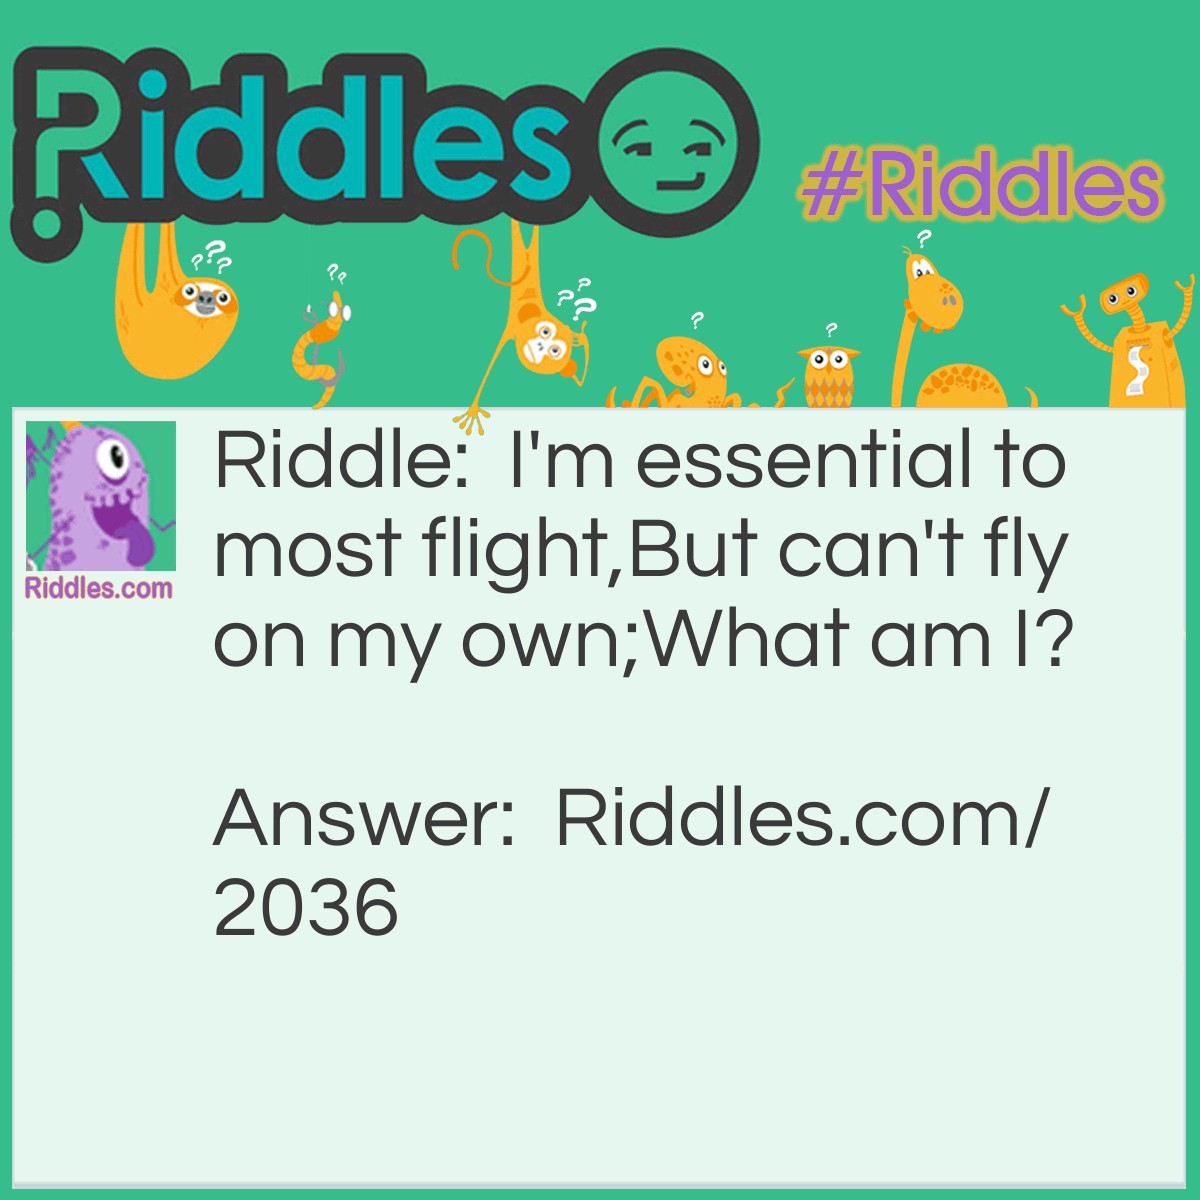 Riddle: I'm essential to most flight,
But can't fly on my own.
What am I? Answer: Feathers.